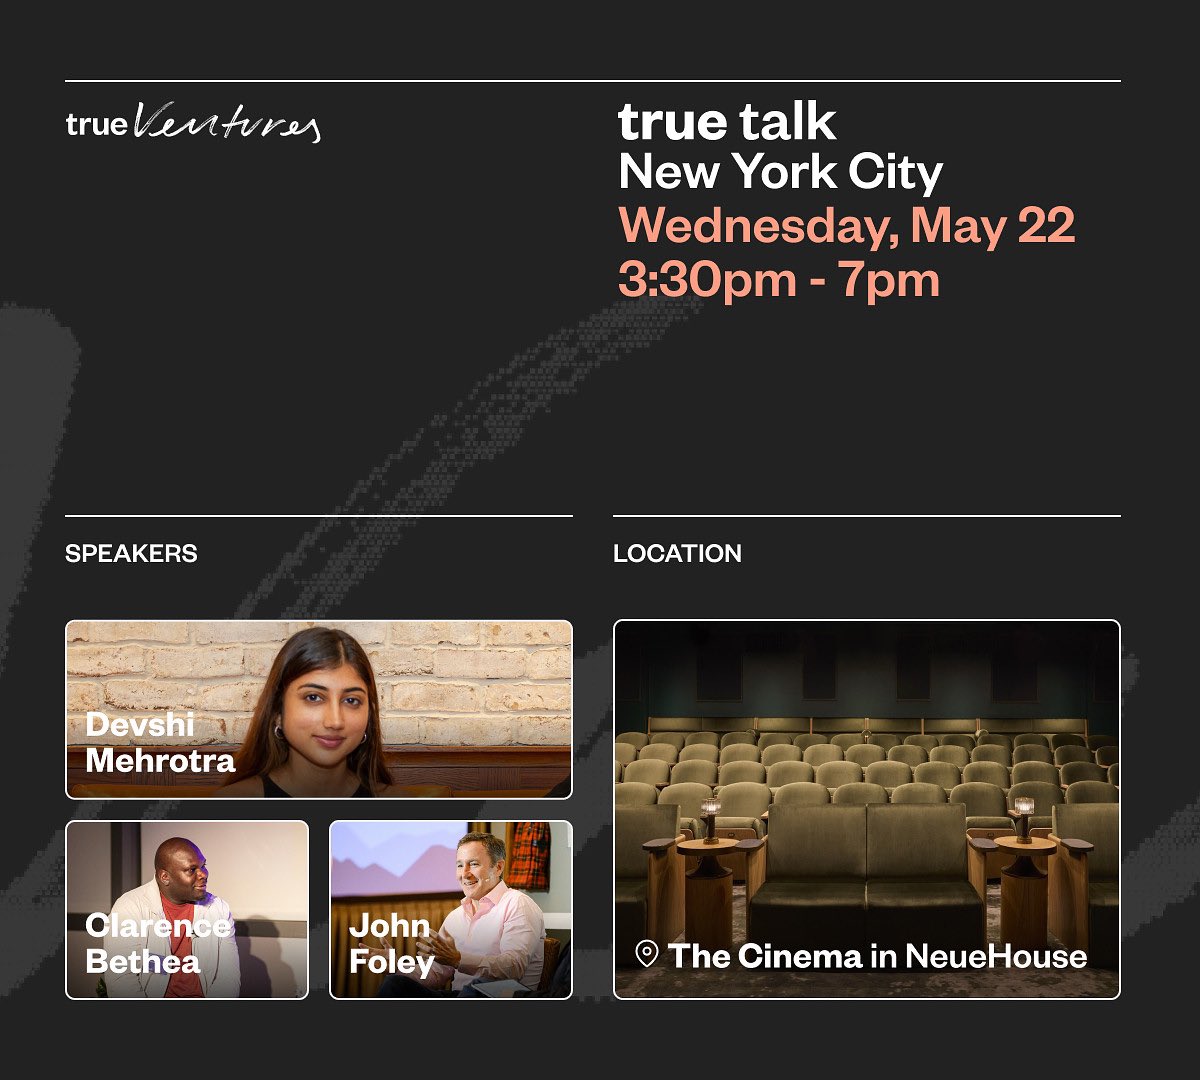 If you’re in or around NYC, join us for our next #truetalk NYC on May 22nd. Excited to have @DevshiMehrotra & @keylargofoley join us for a REAL talk. Register here: trueventures.typeform.com/to/H8vBqz1h